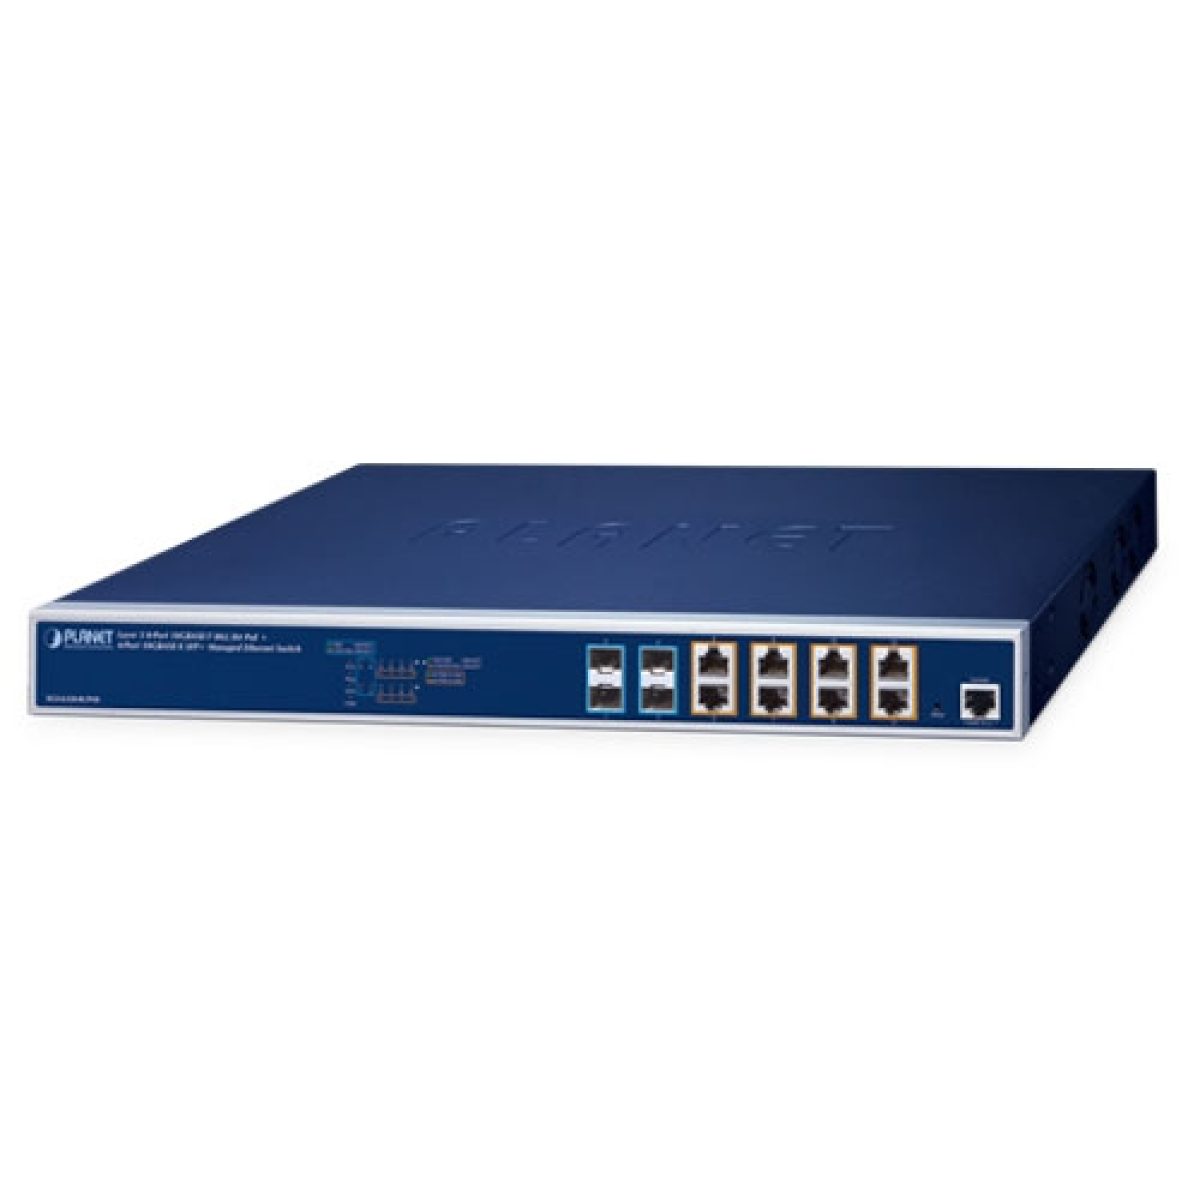 L3POE-XGS4804-400 BT: Layer 3 400W Managed Gigabit PoE+ Switch with 10G  uplink _Rich Layer 3 Management Network Swith_PoE Switch_Products, wifi6  MESH Router, AirLive, Managed Switch, 5G